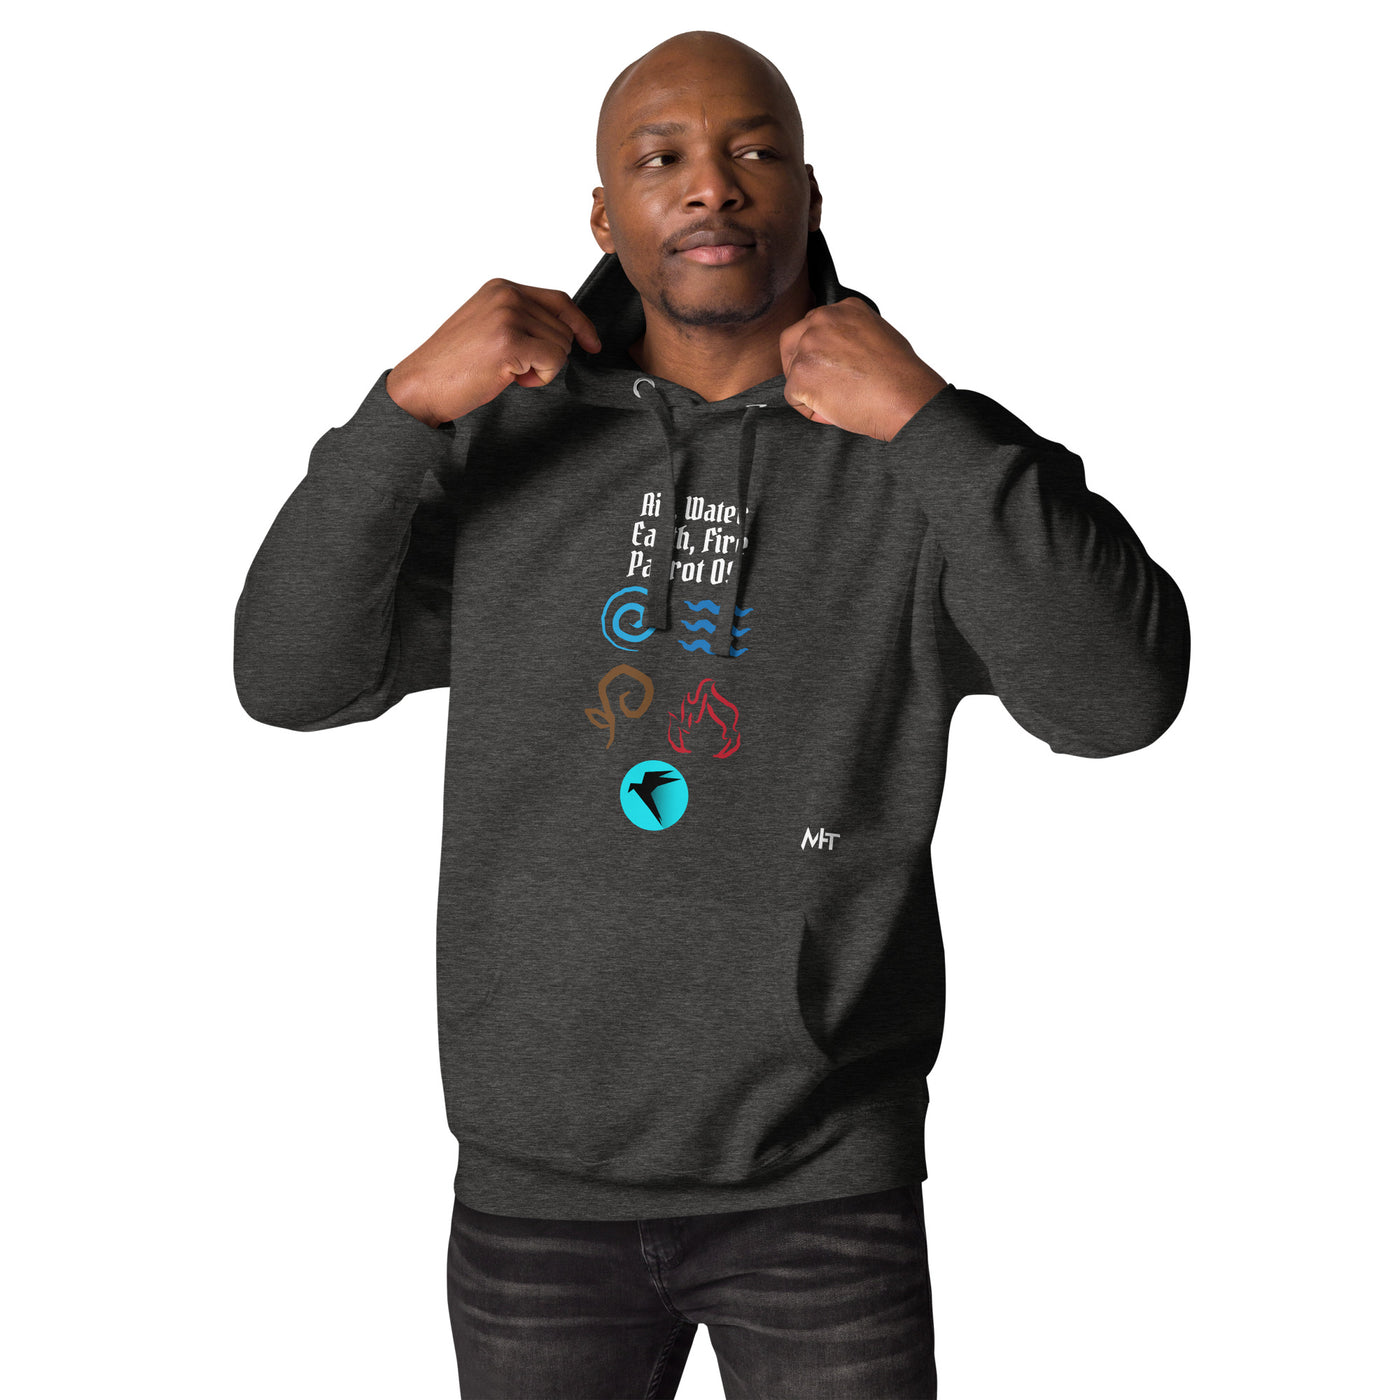 Air, Water, Earth, Fire, Parrot OS - Unisex Hoodie